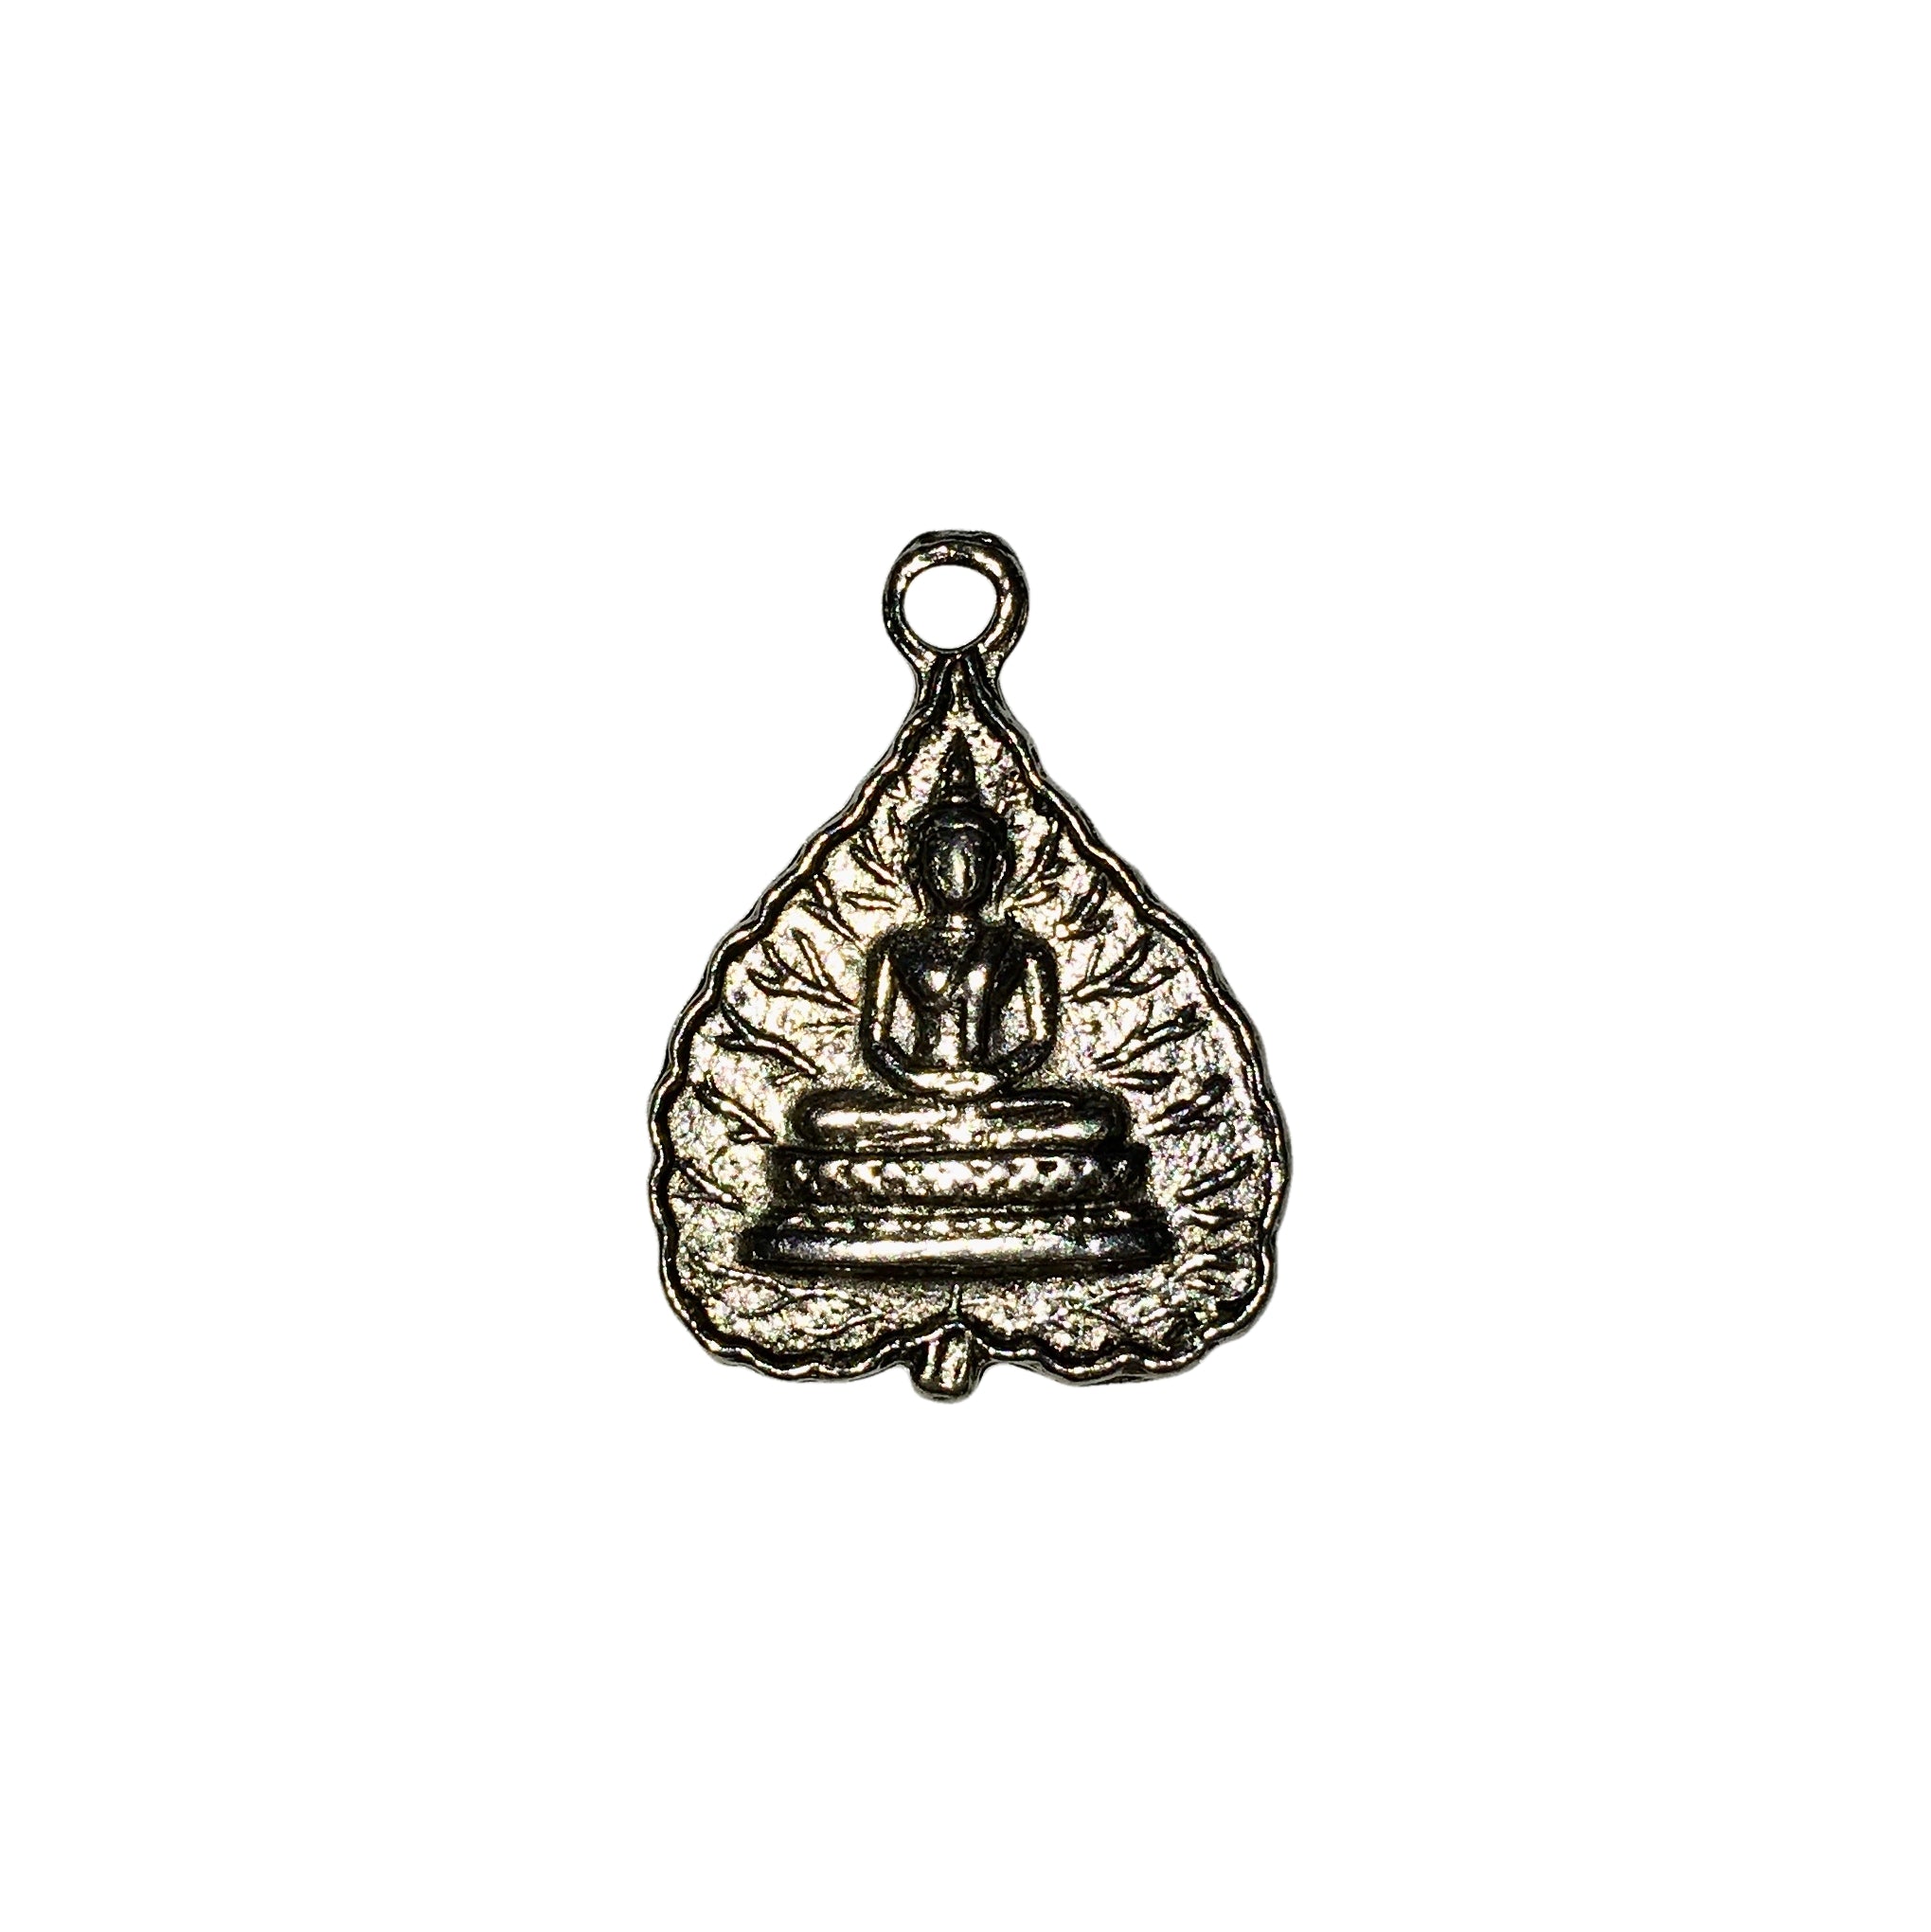 Tibetan Leaf Buddha Charms - Qty of 5 Charms - Lead Free Pewter Silver - American Made